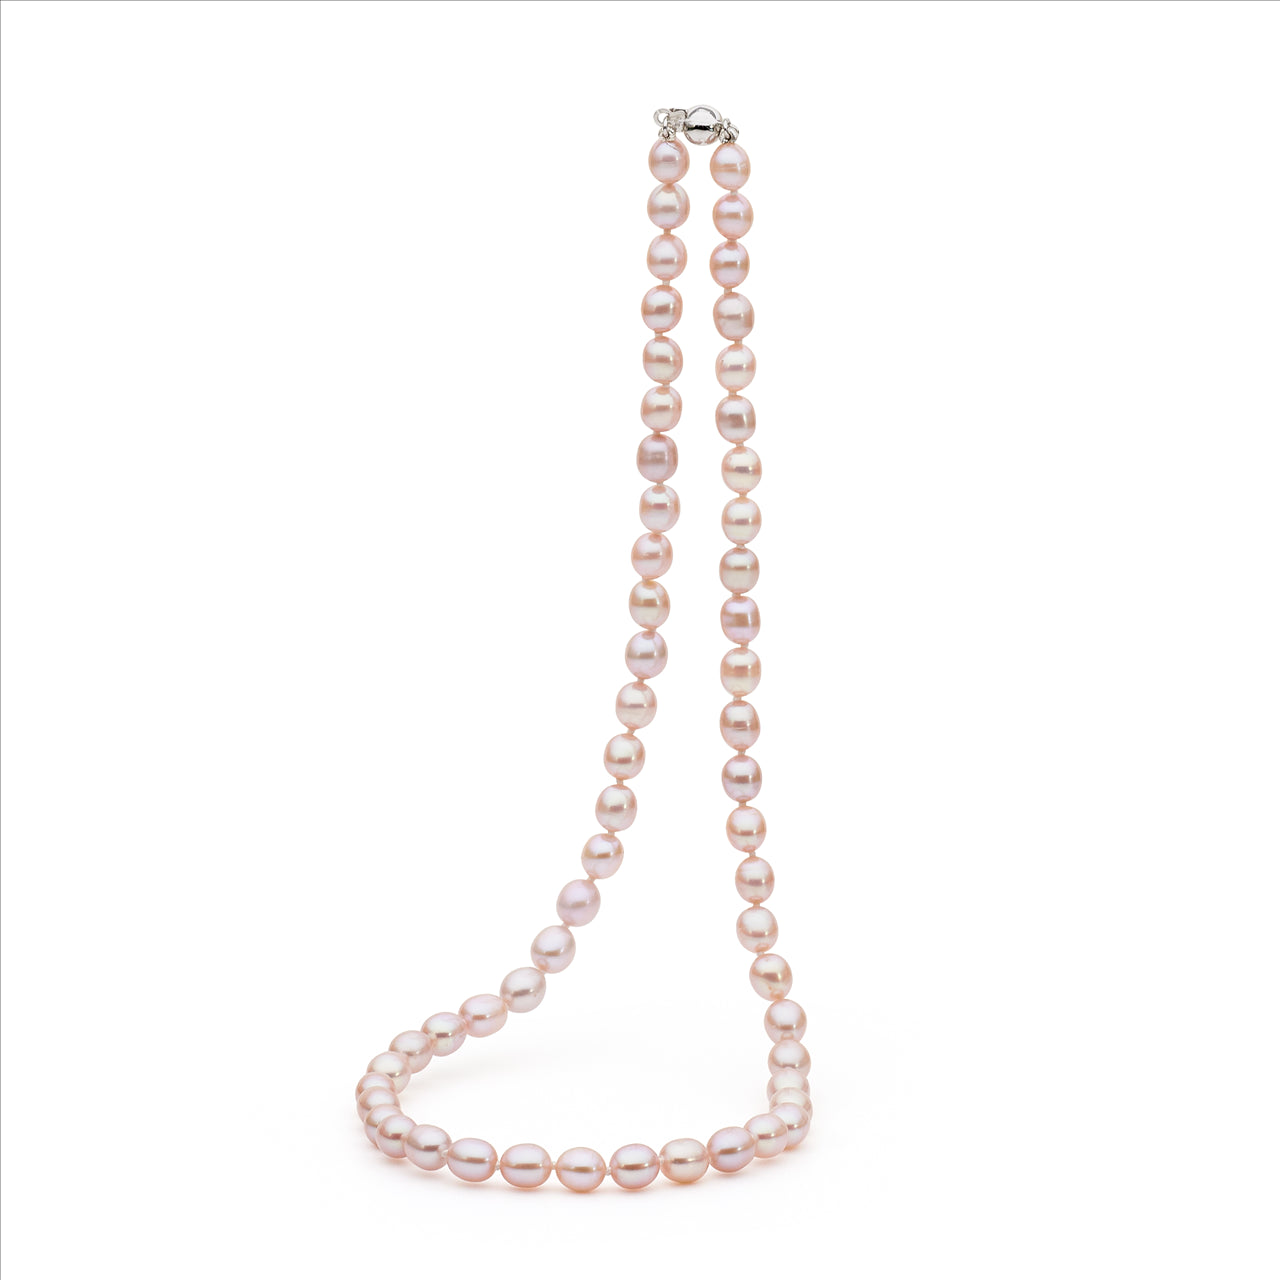 Pink 6-6.5Mm Oval Fresh Water Pearl Necklace 45Cm Sterling Silver Clasp